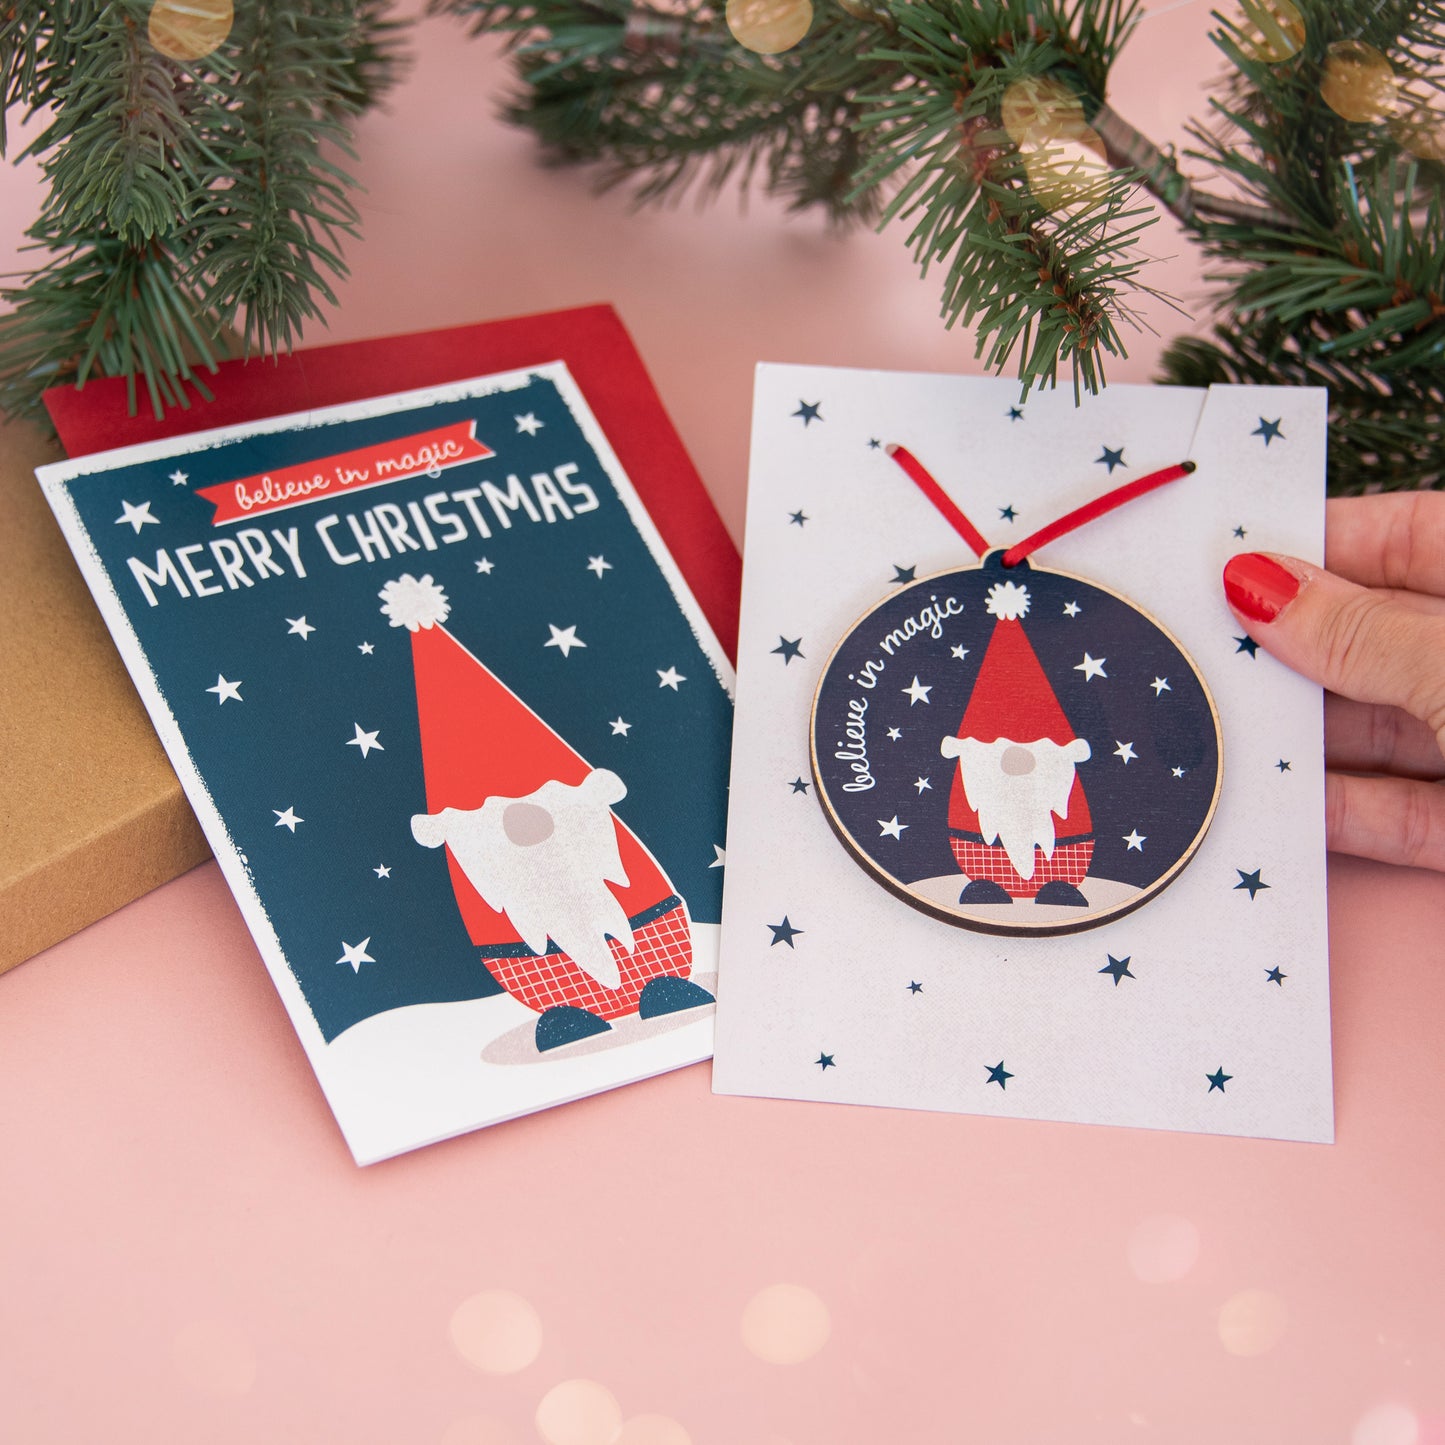 Send direct to recipient – Christmas card and decoration